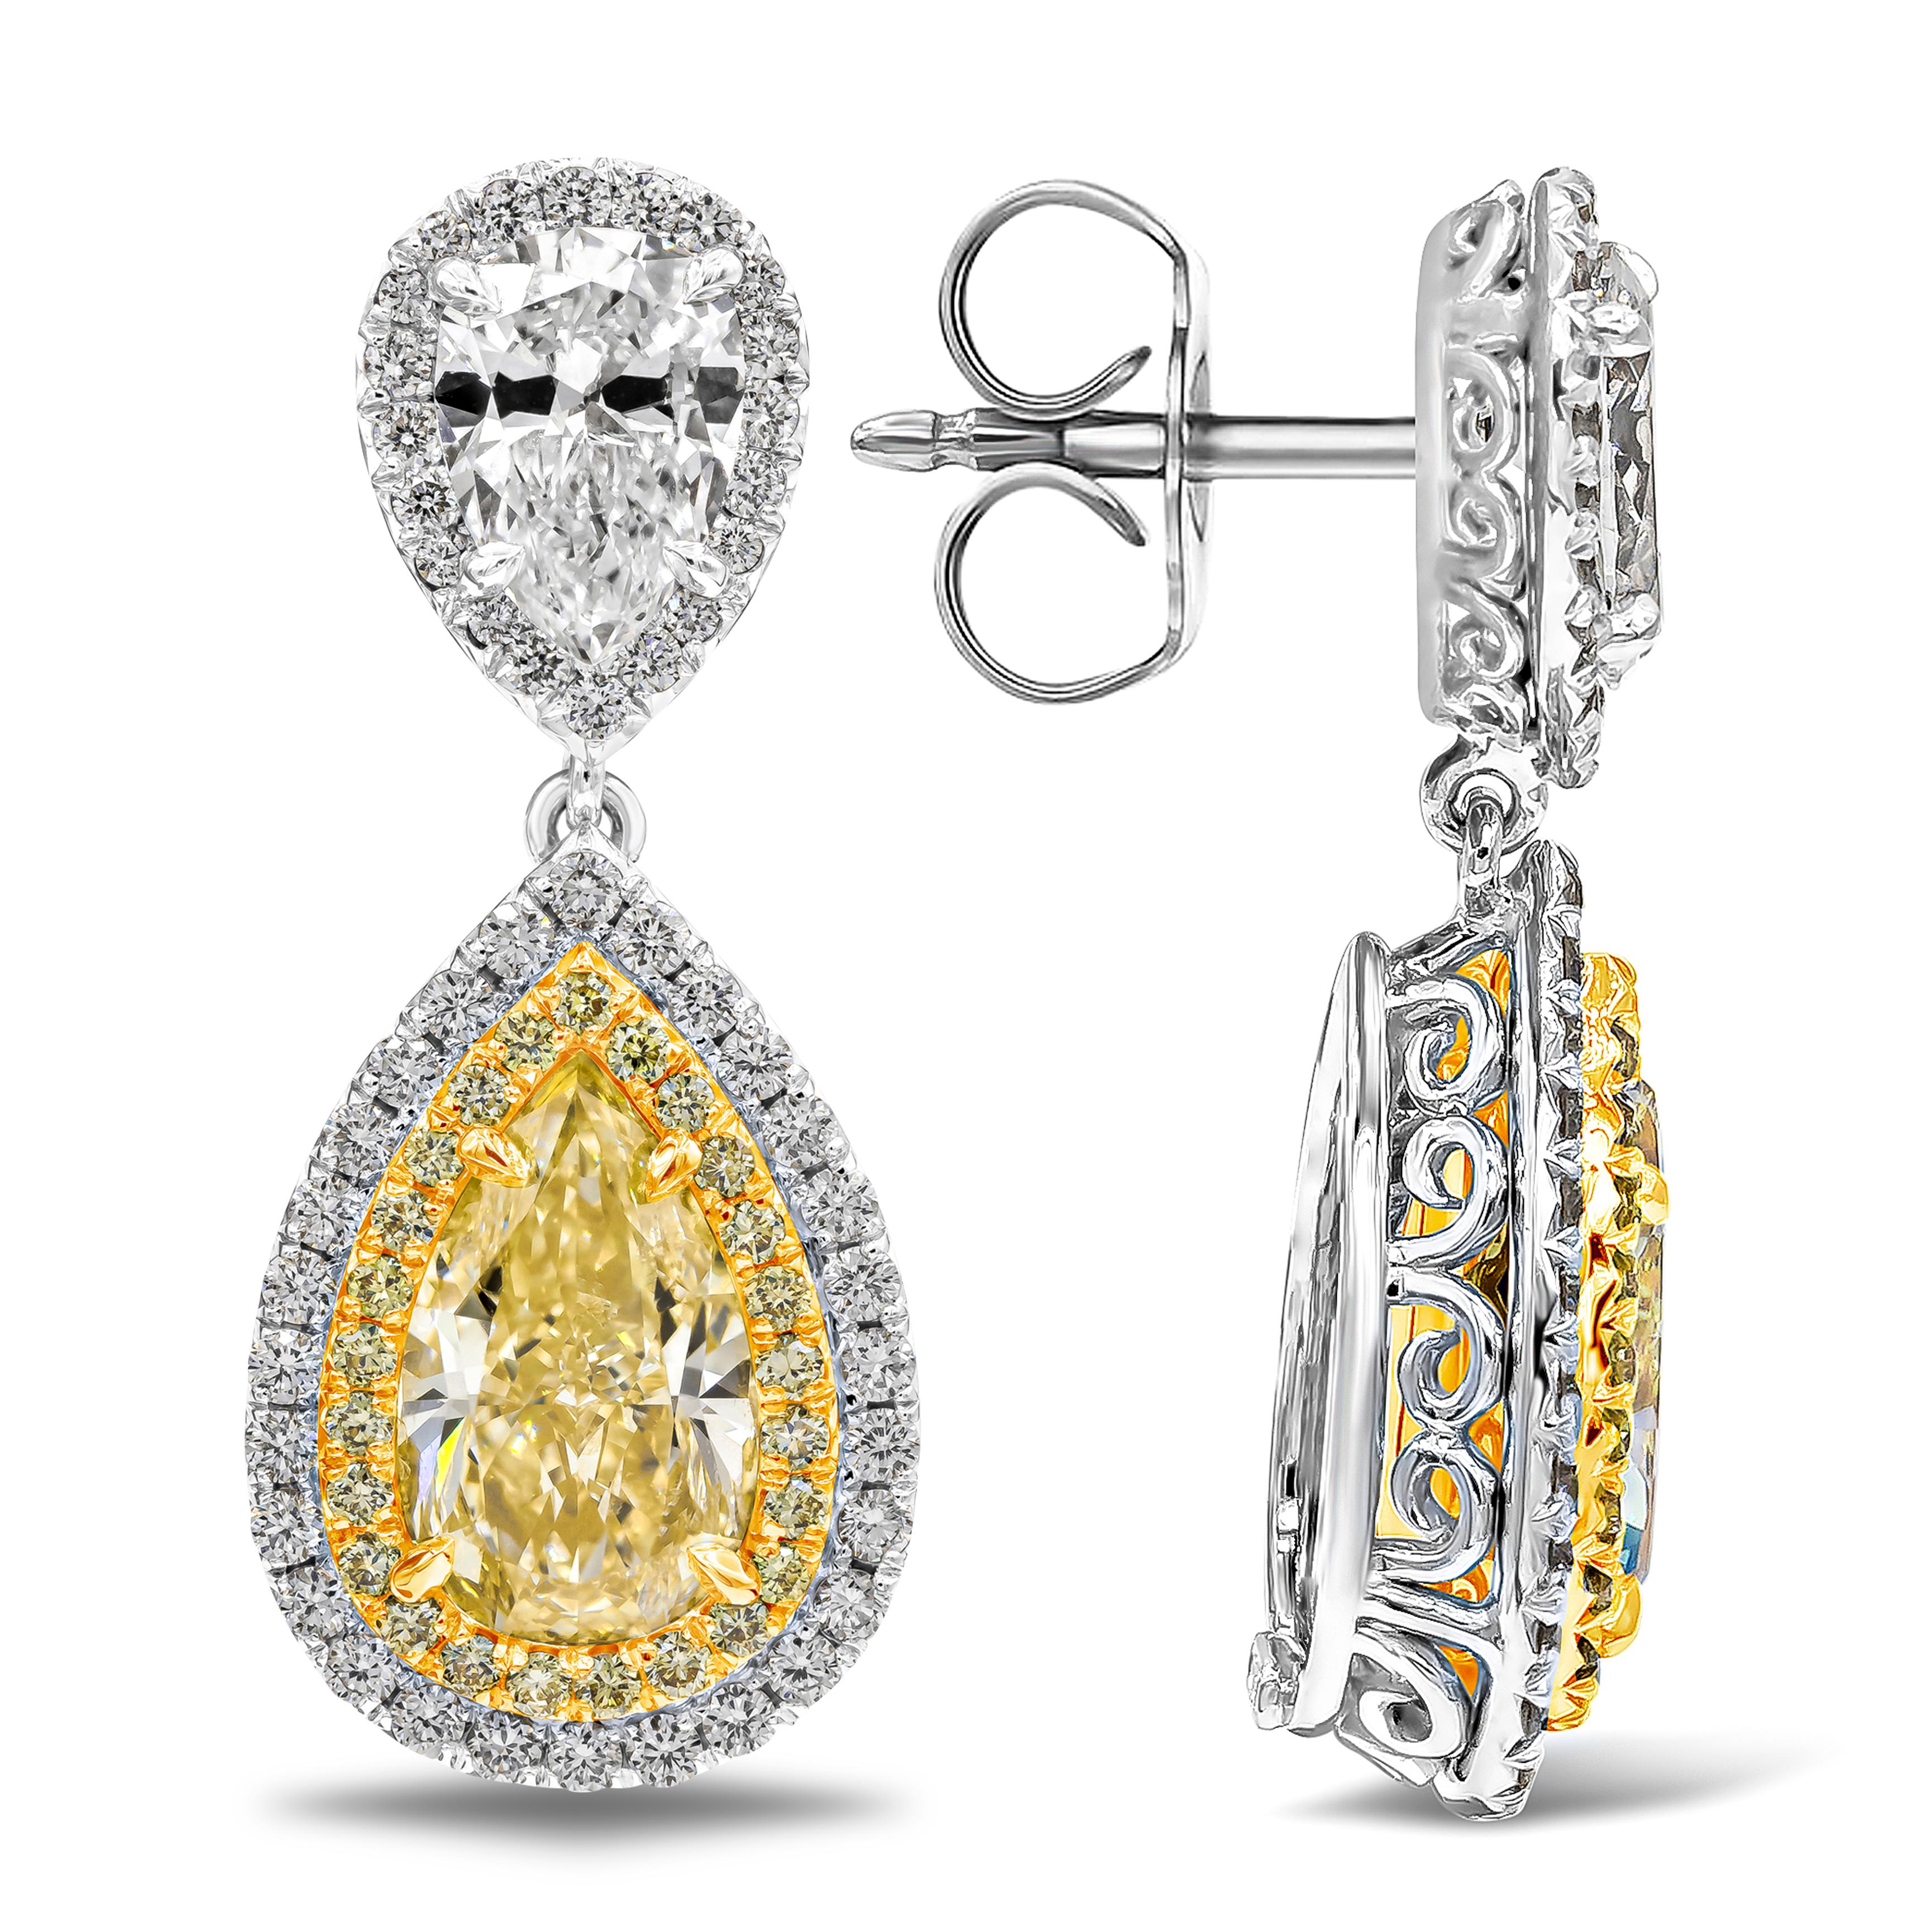 Showcasing a color-rich and elegant two pear shape yellow diamonds weighing 2.13 and 2.06 carats approximately, surrounded by two rows of round brilliant diamonds in a halo design. Suspended on a pear shape white diamond accented by a row of round